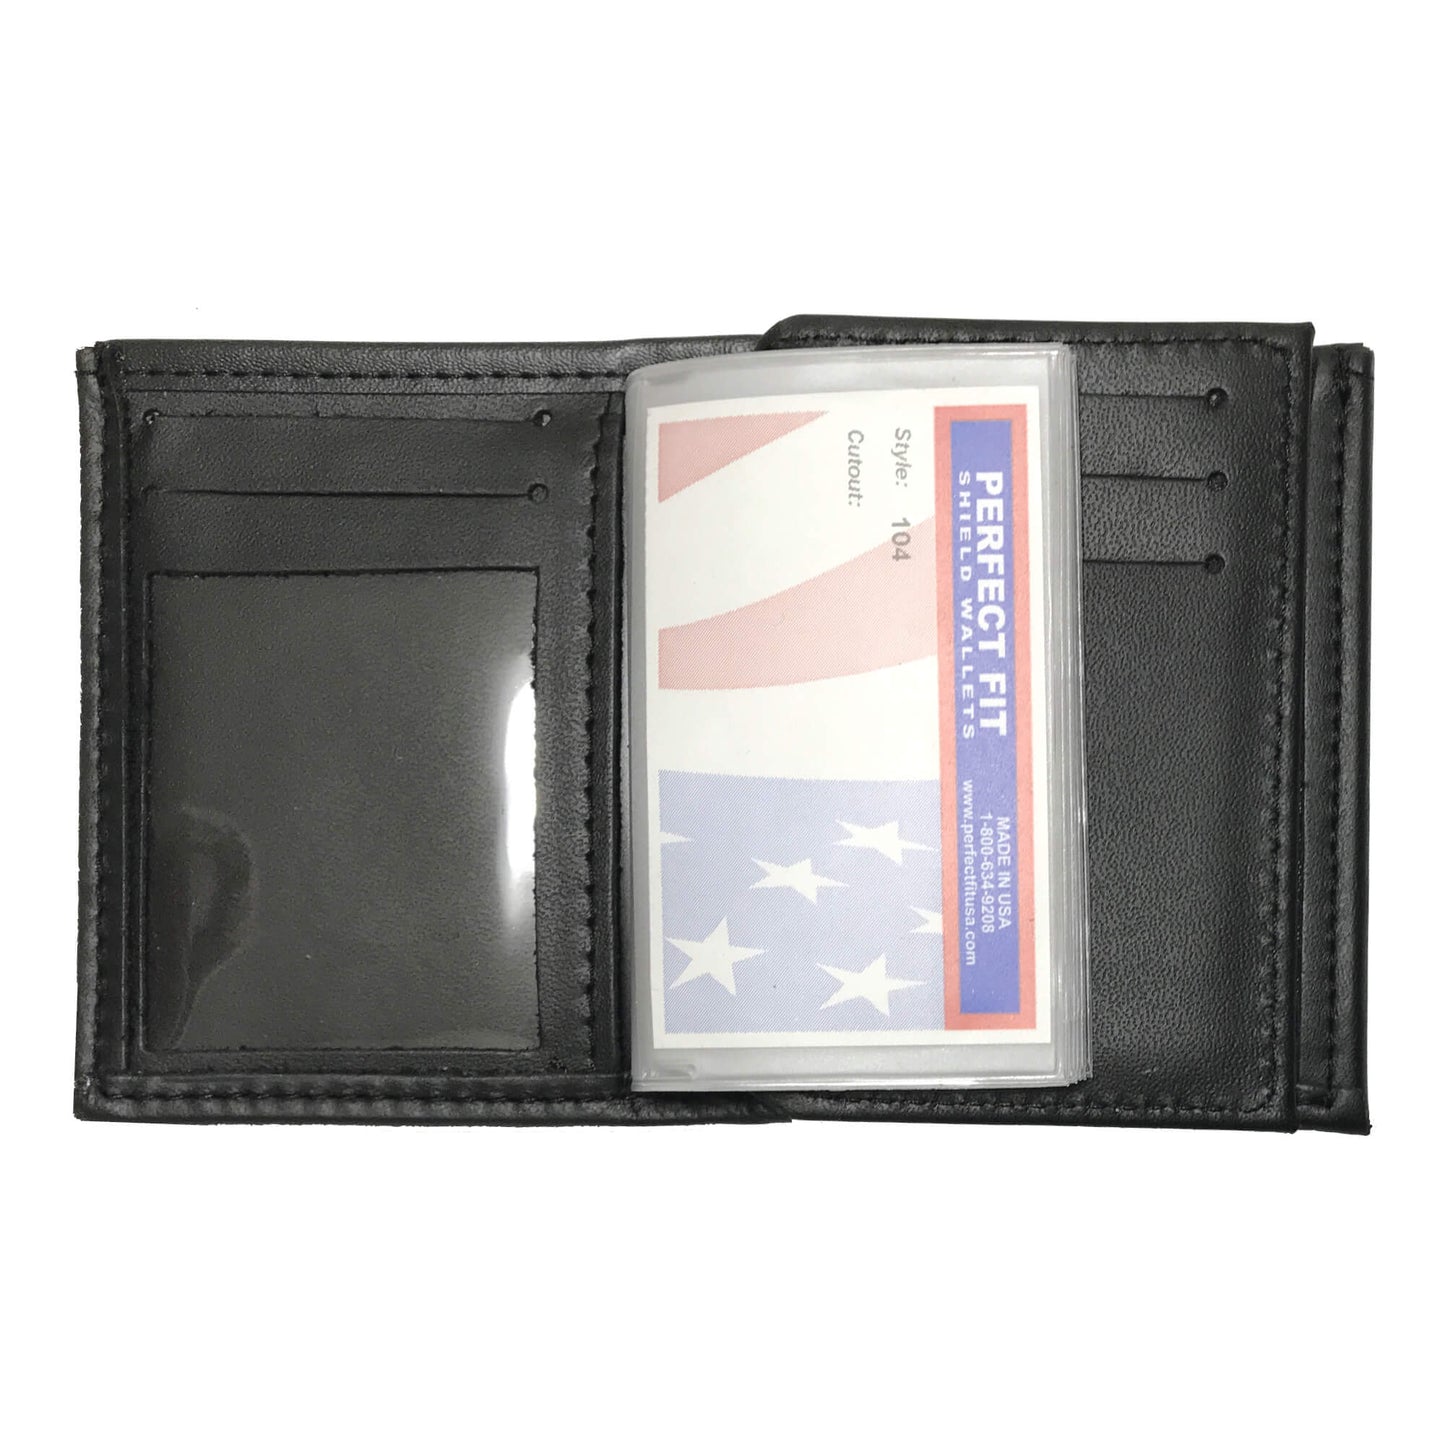 New York Police Department (NYPD) Detective Bifold Hidden Badge Wallet-Perfect Fit-911 Duty Gear USA